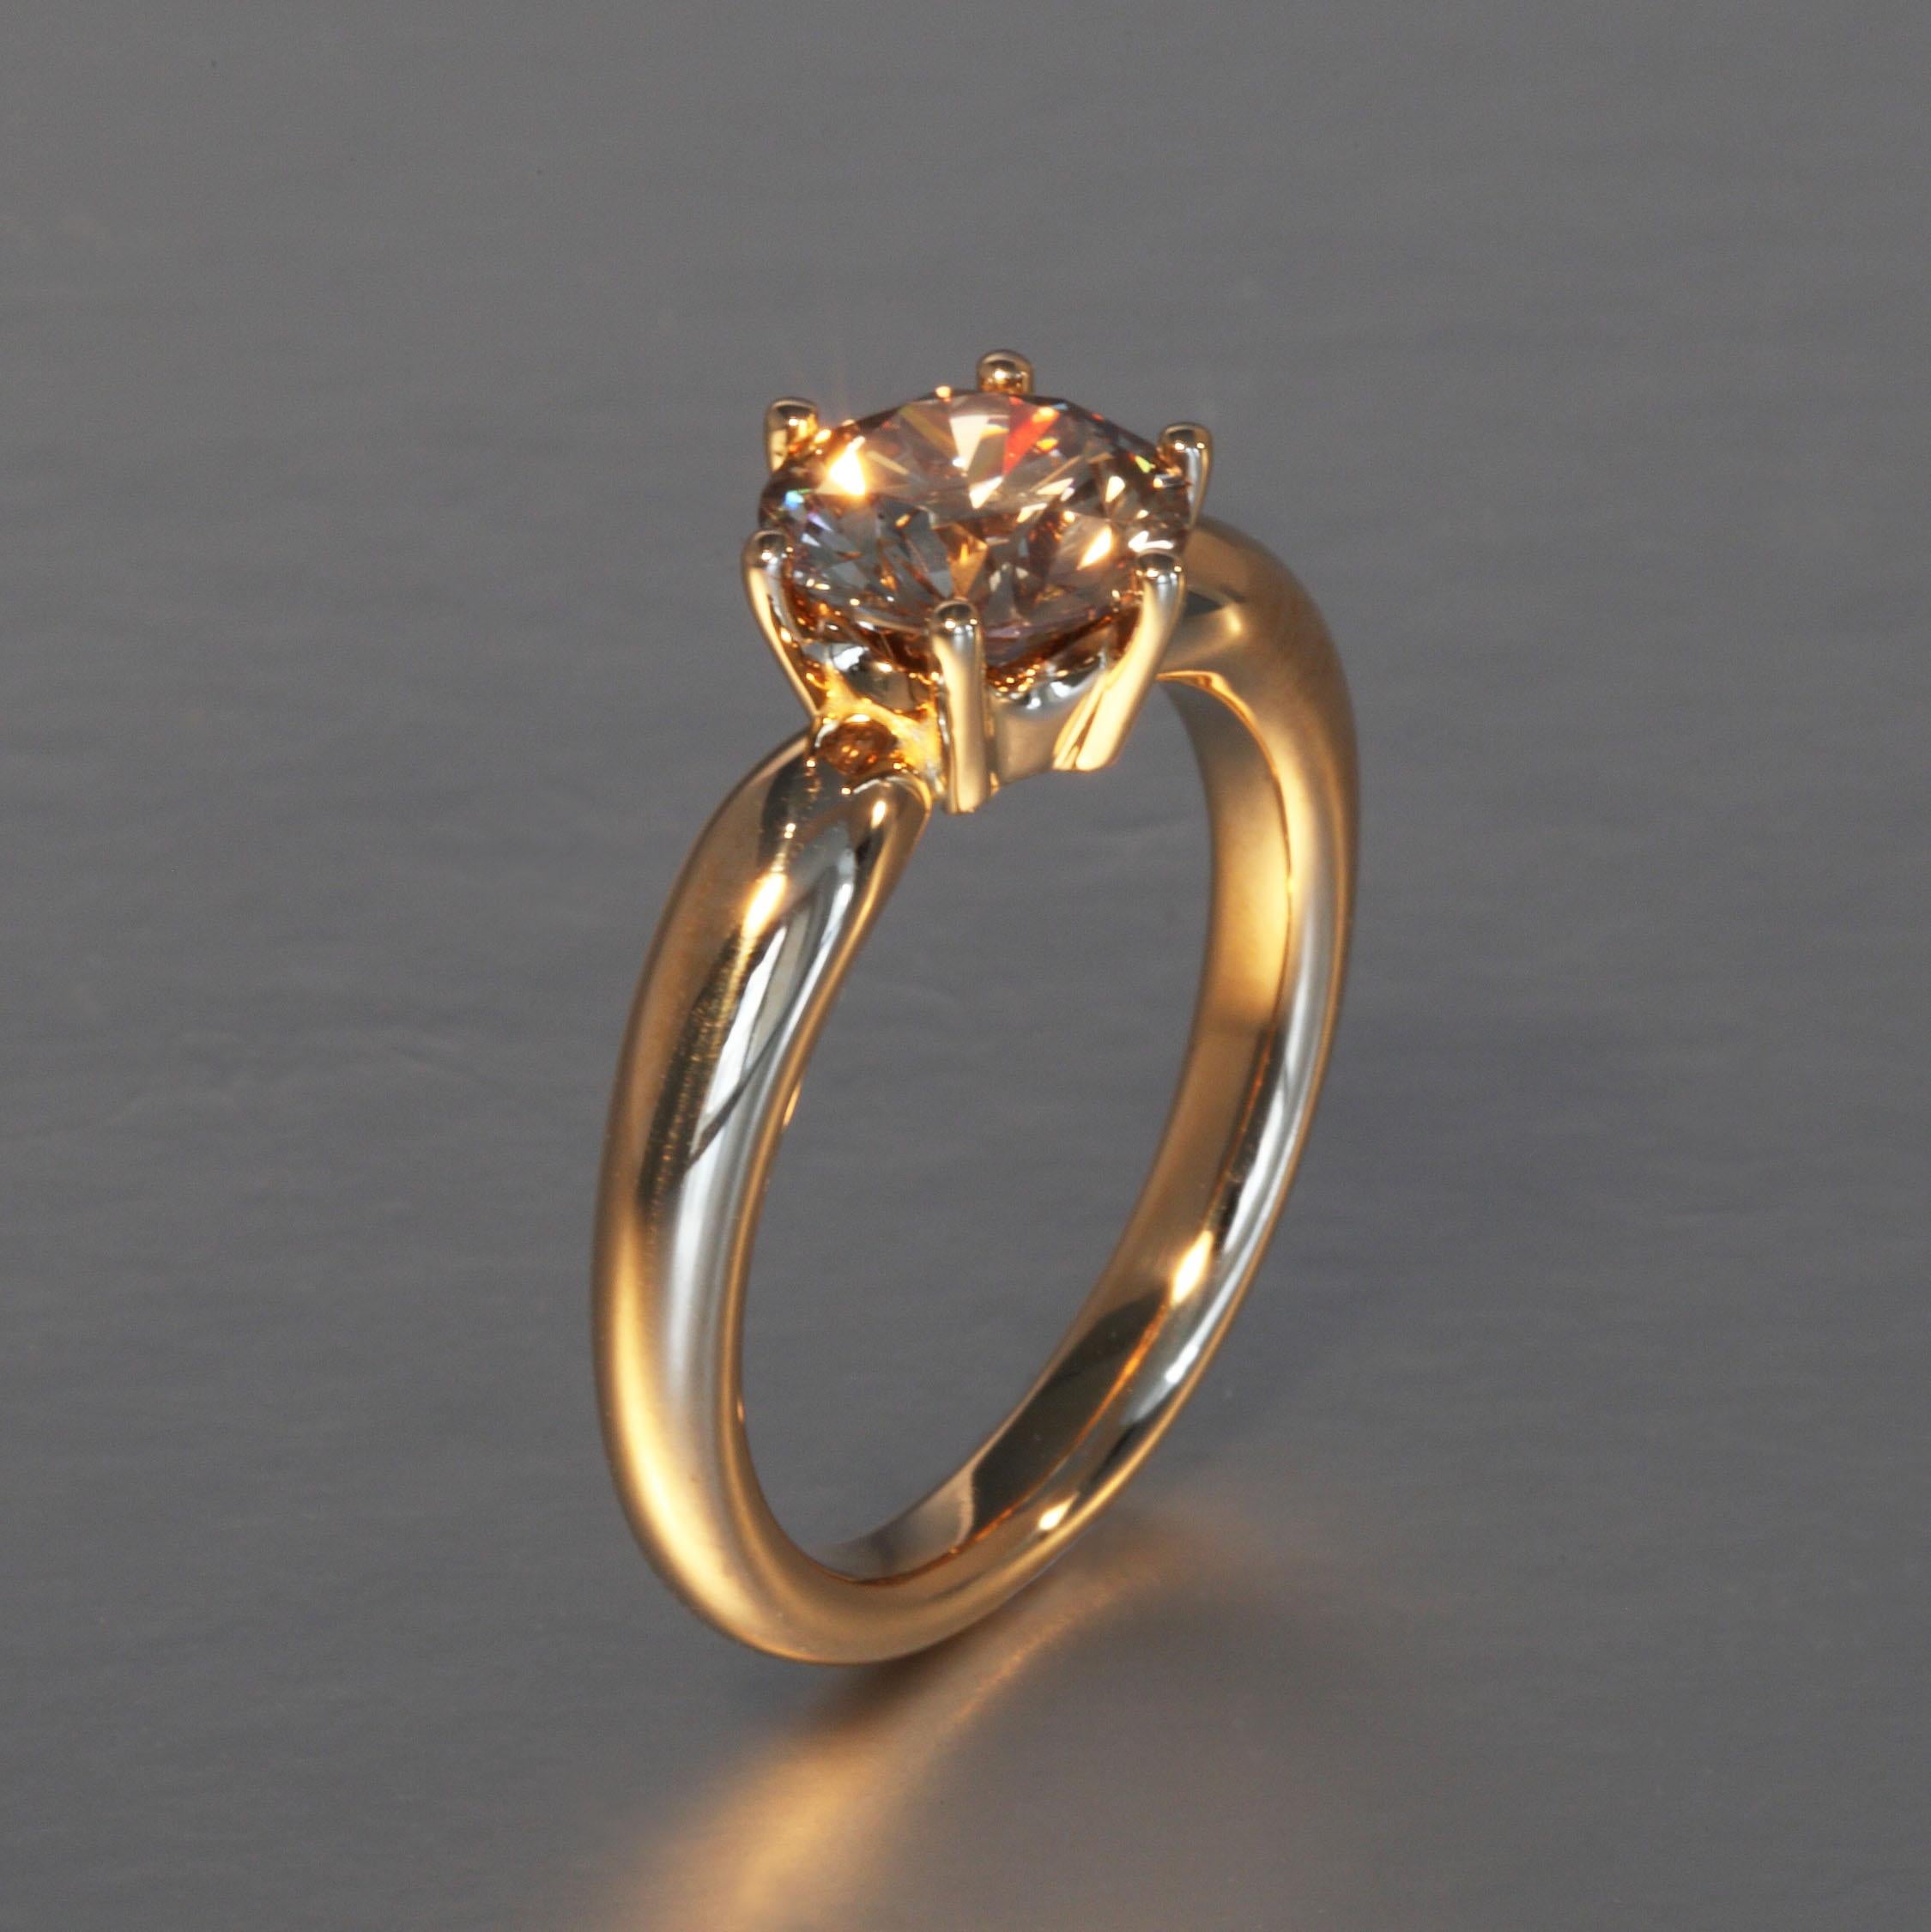 This 1.43 carat natural brown diamond is mounted in a solitaire rose gold ring. This one of a kind piece is designed and hand made, no casting, in Zurich, Switzerland by Robert Vogelsang and signed RV.

It is set in 18 Karat rose gold and weighs 5.2